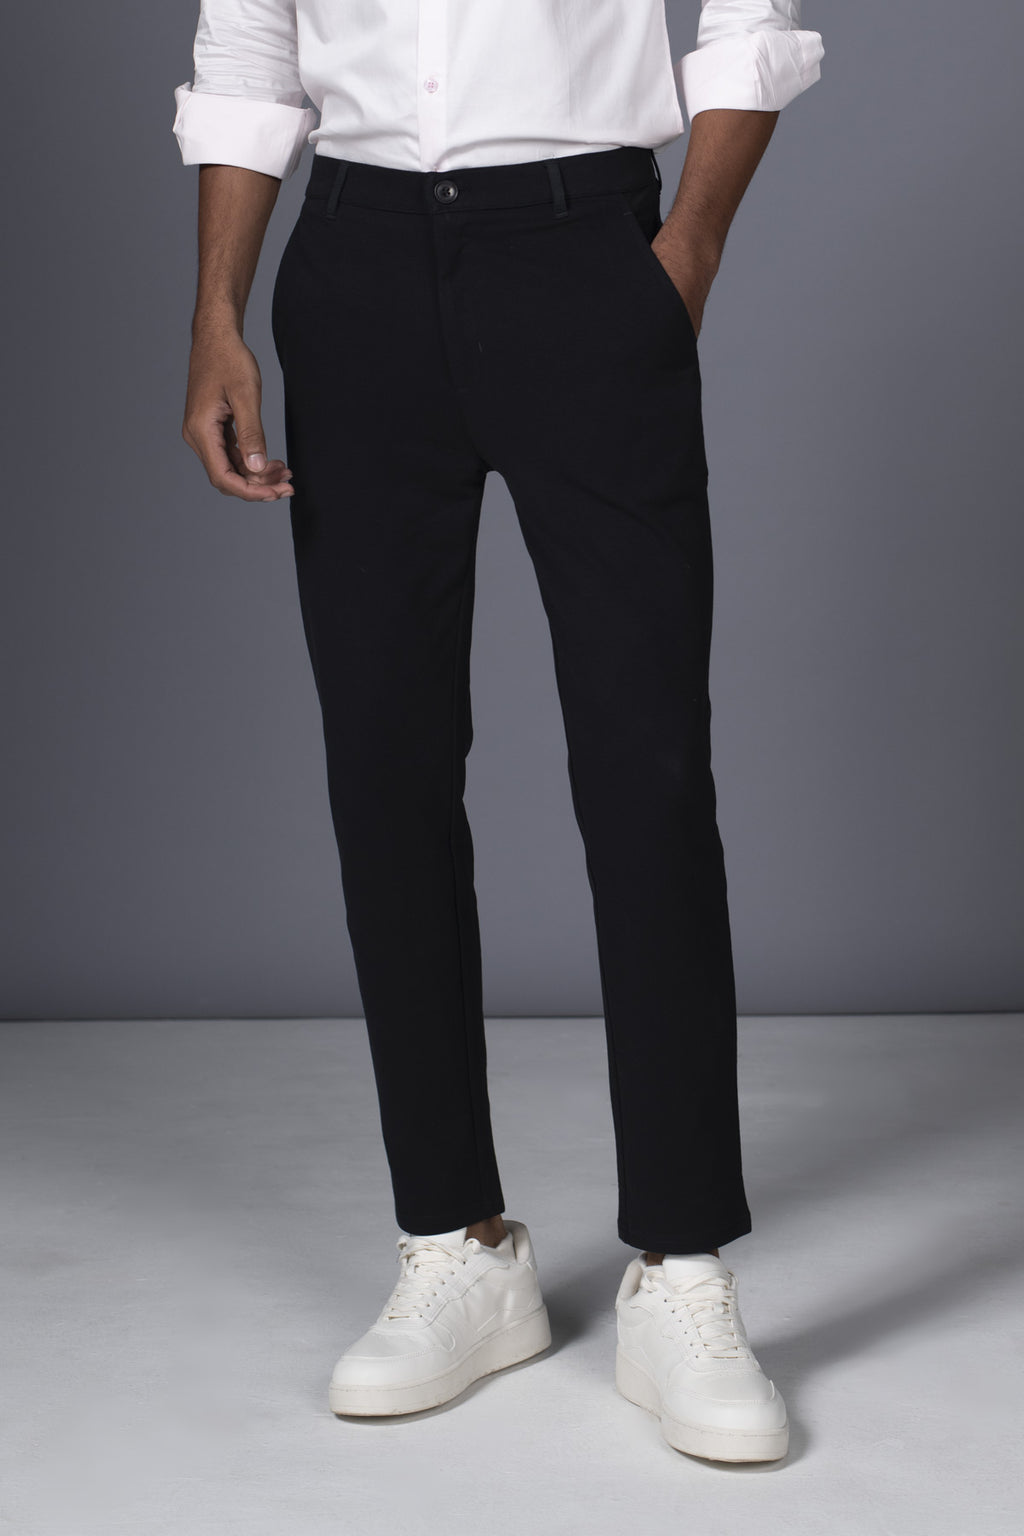 Buy Black Trousers  Pants for Women by CODE by Lifestyle Online  Ajiocom